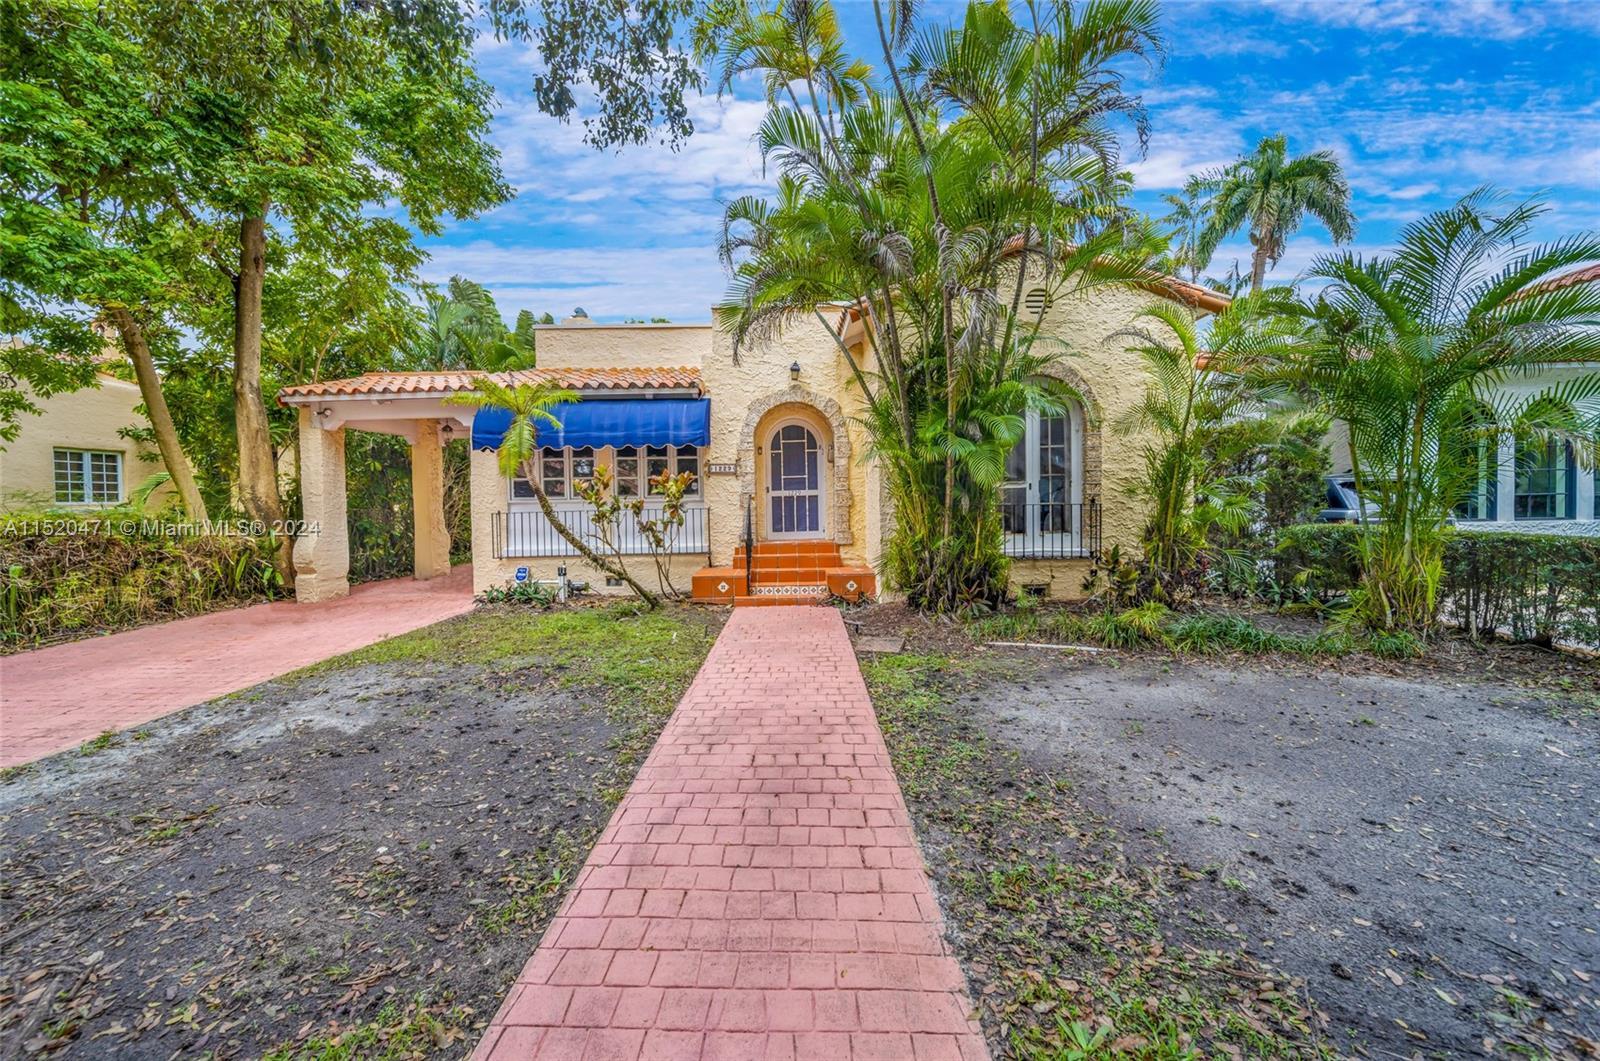 Photo of 1229 Alhambra Cir in Coral Gables, FL